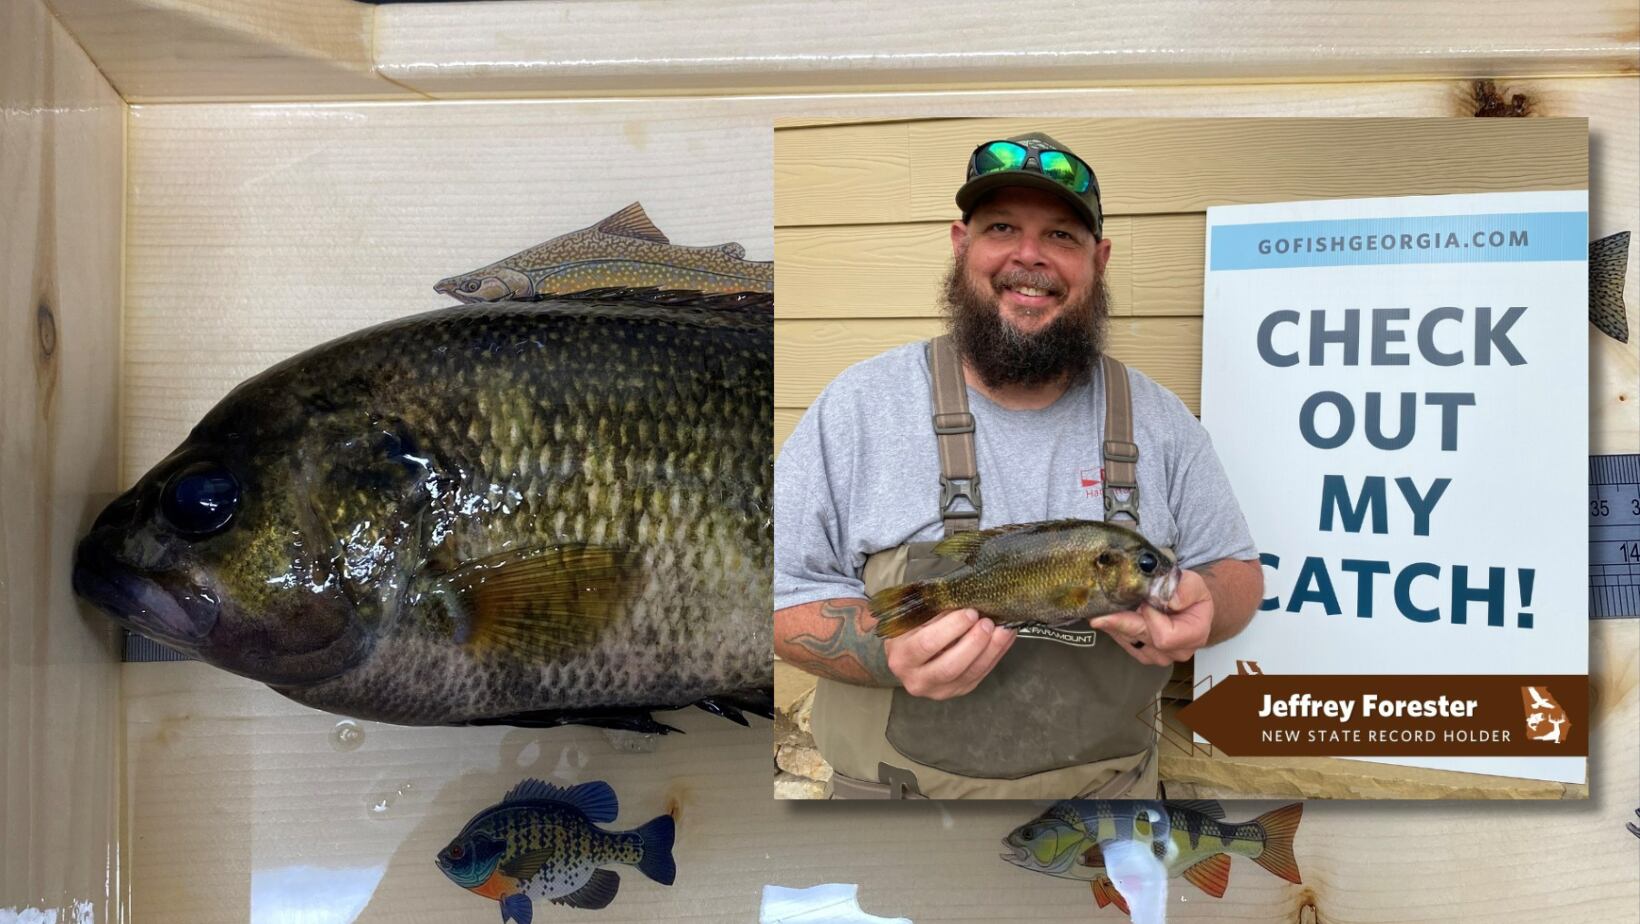 North Georgia fisherman man reels in new state record rock bass, officials  say – WSB-TV Channel 2 - Atlanta